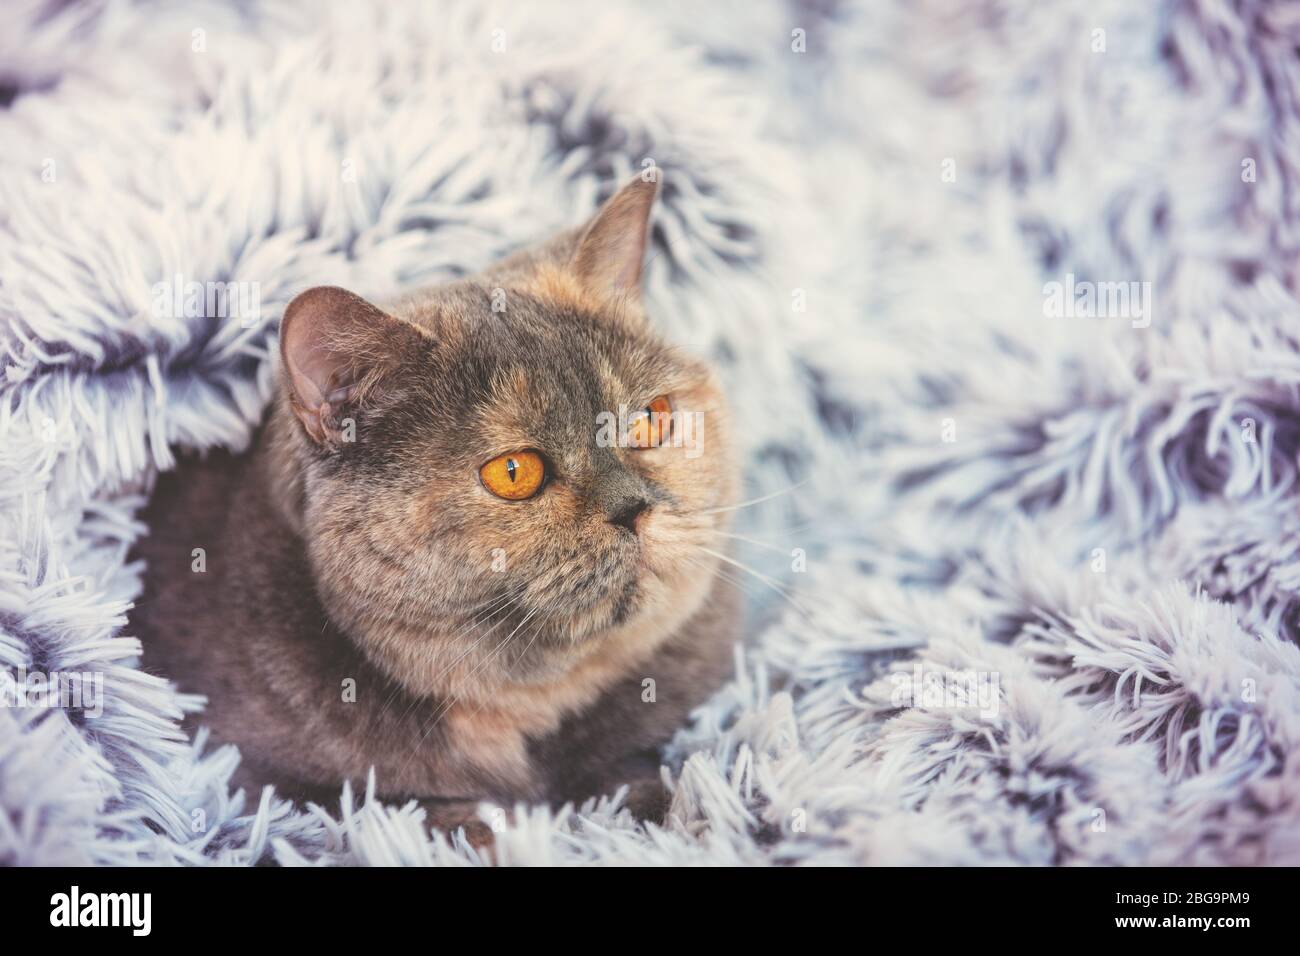 Cute cat peeking out from under the soft fur blue blanket. Relaxing at home British shorthair cat Stock Photo